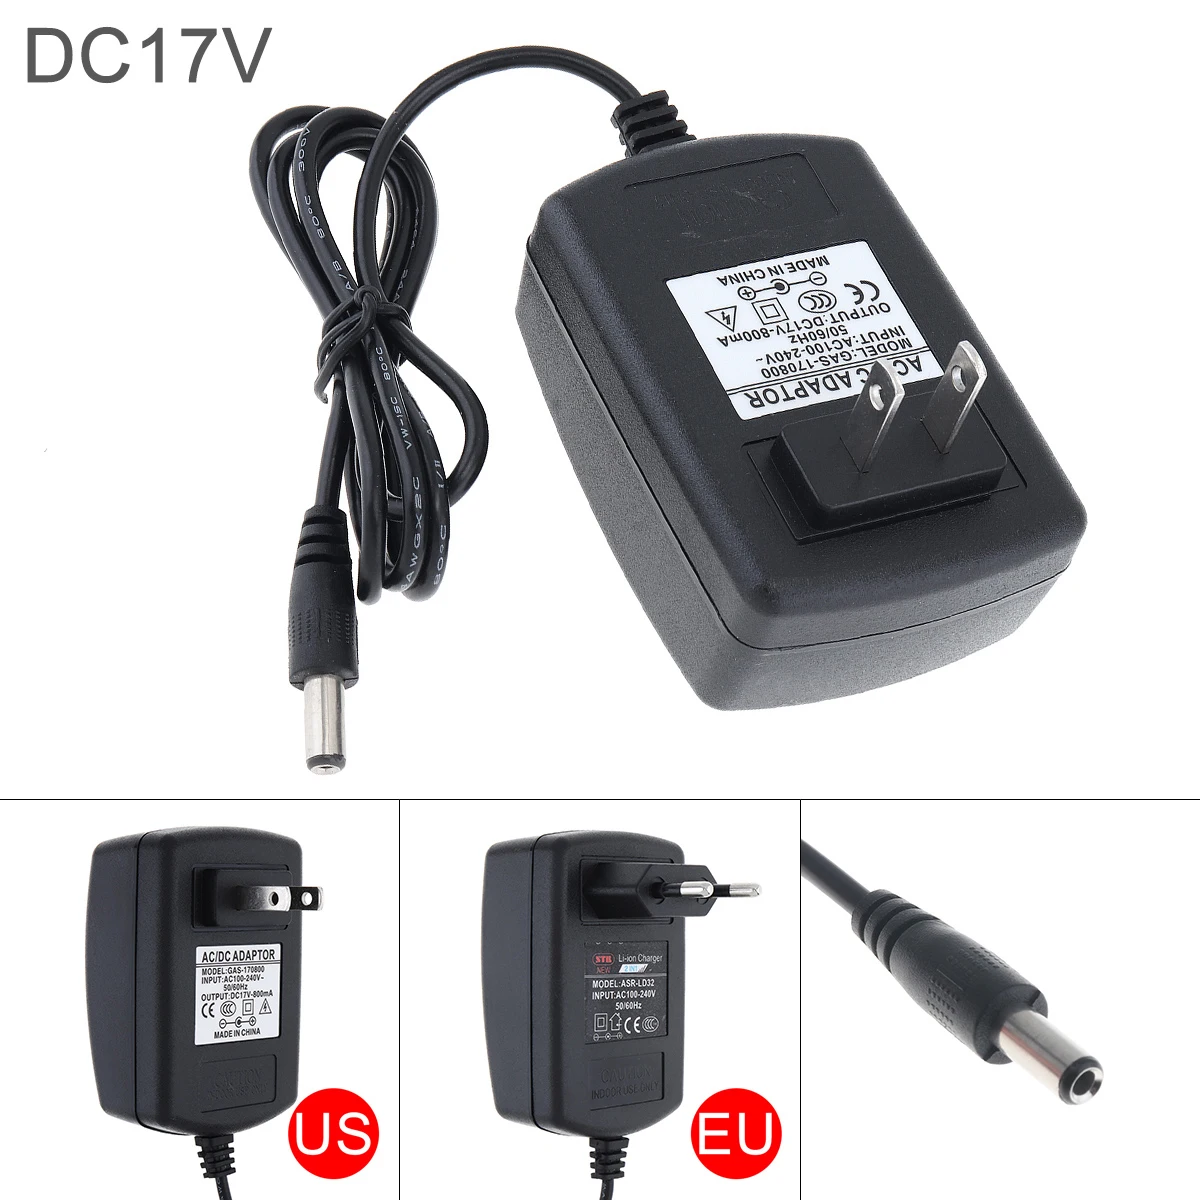 80cm Universal DC 16.8-17V Lithium Battery Rechargeable Charger 100-240V Power Supply for Lithium Electrical Drill Screwdriver 80cm universal dc 16 8 17v lithium battery rechargeable charger 100 240v power supply for lithium electrical drill screwdriver